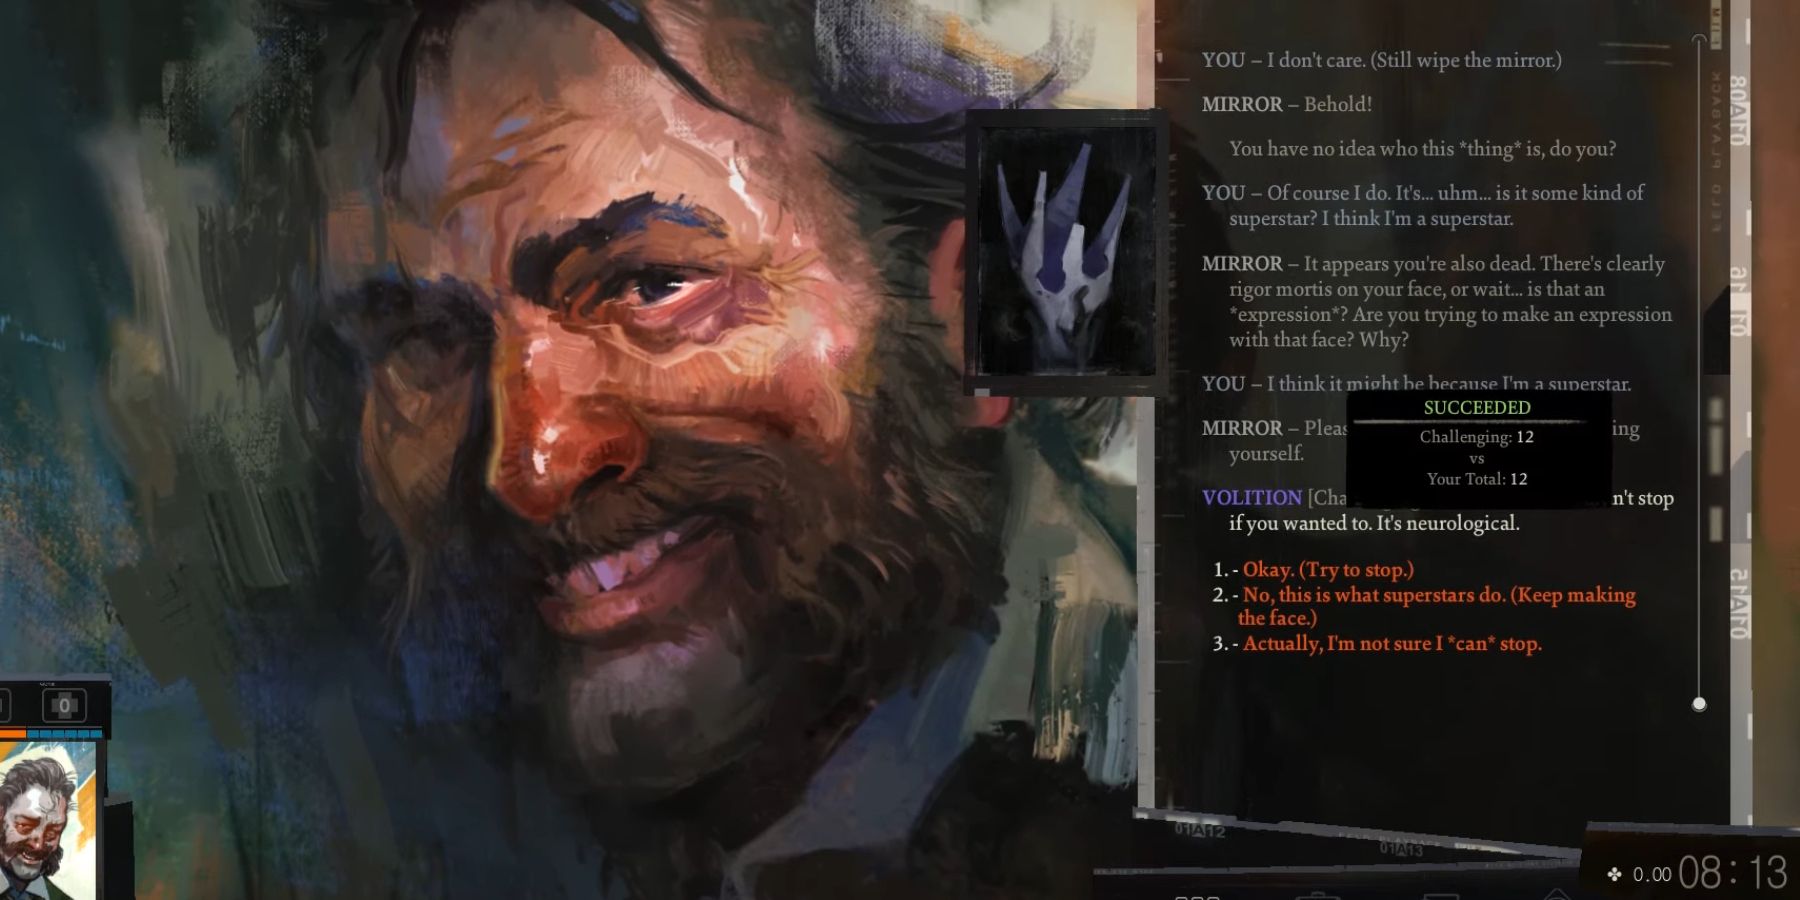 A dialogue box from Disco Elysium beside an image of the main character.